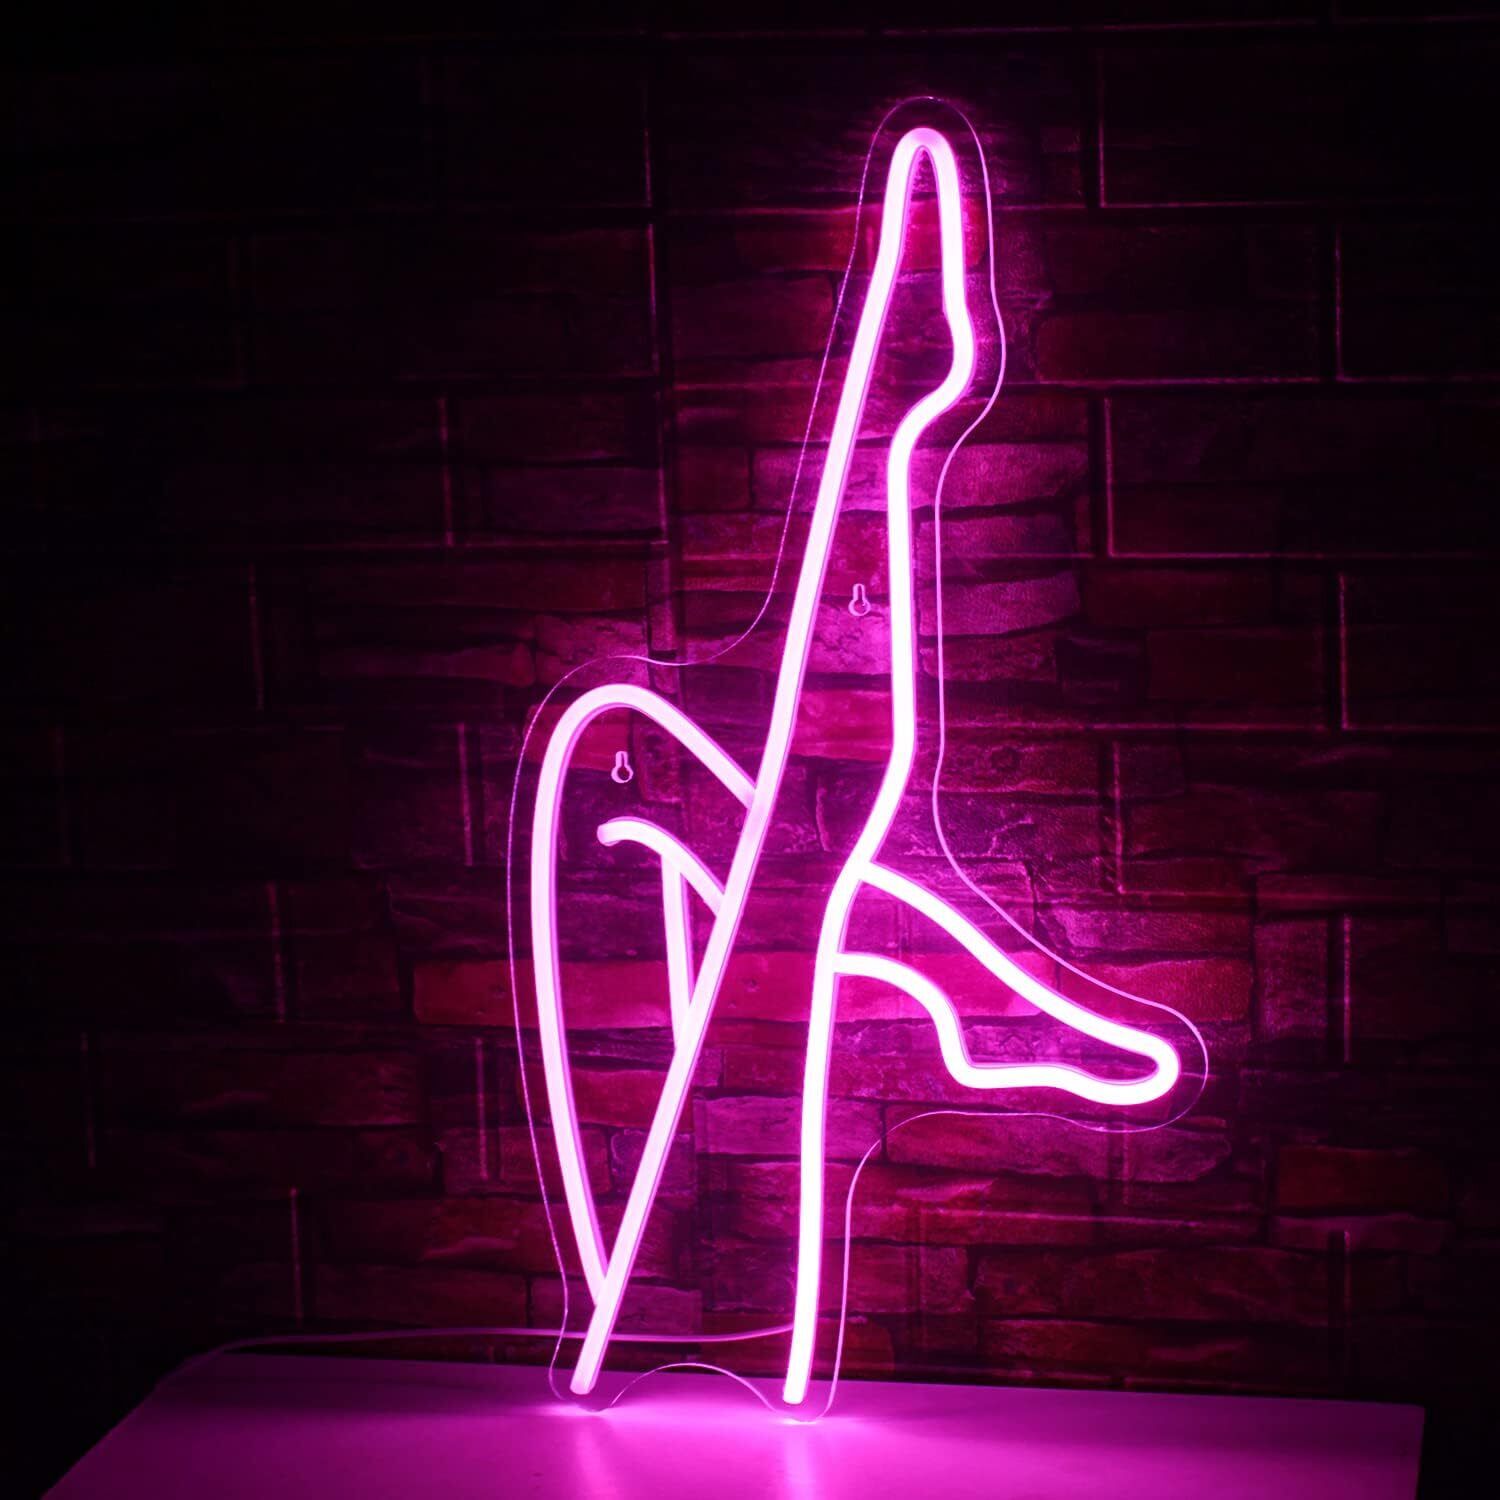 Sexy Leg Neon Sign Light USB Powered For Bedroom Bar Man Cave Hotel Wall Decor